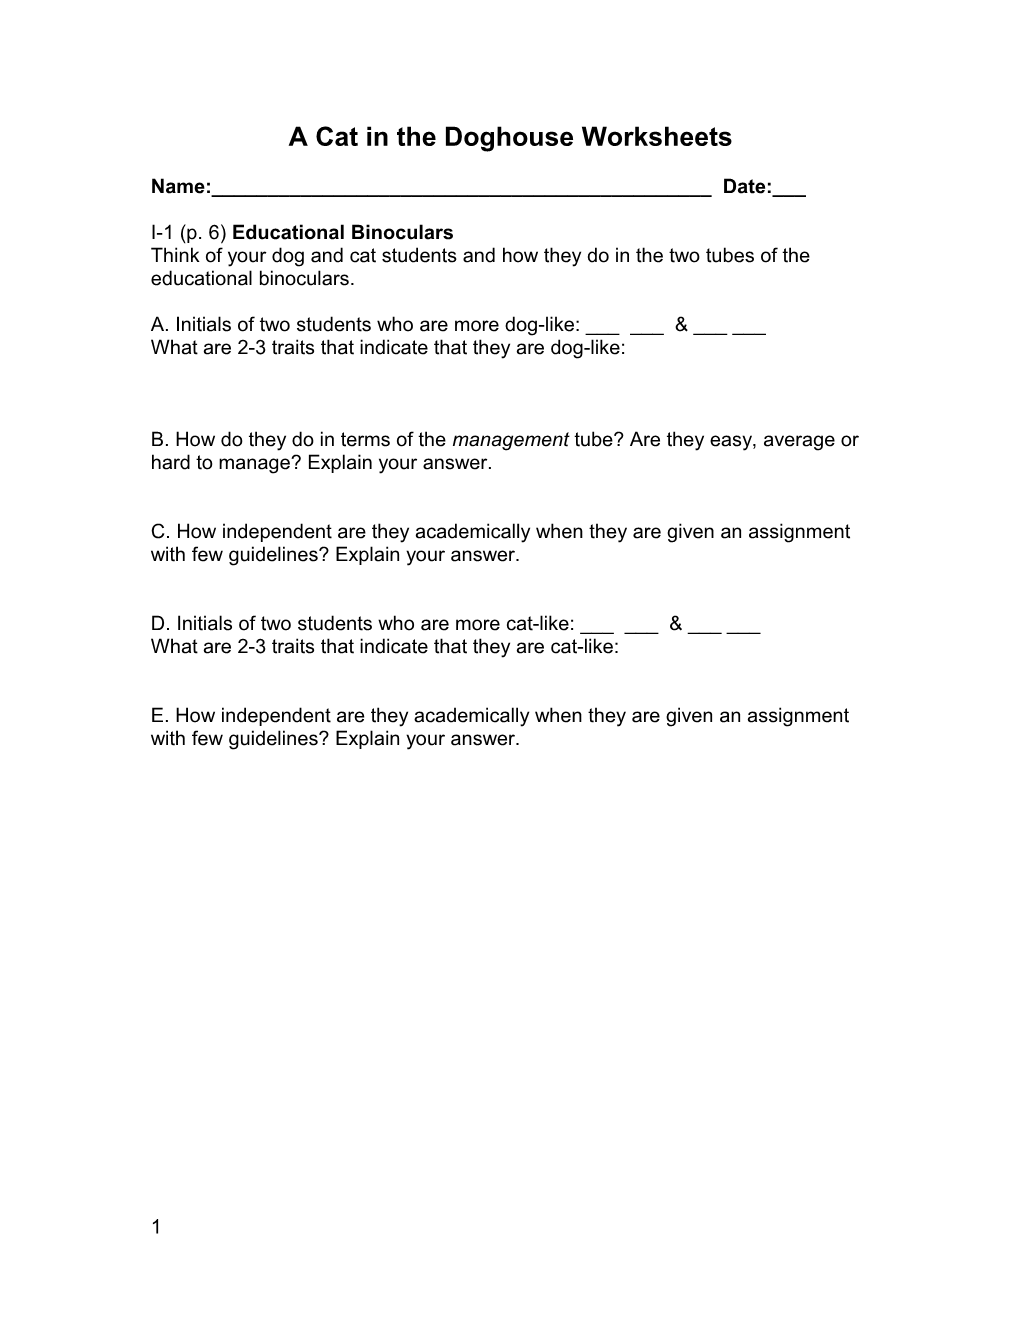 A Cat in the Doghouse Worksheets